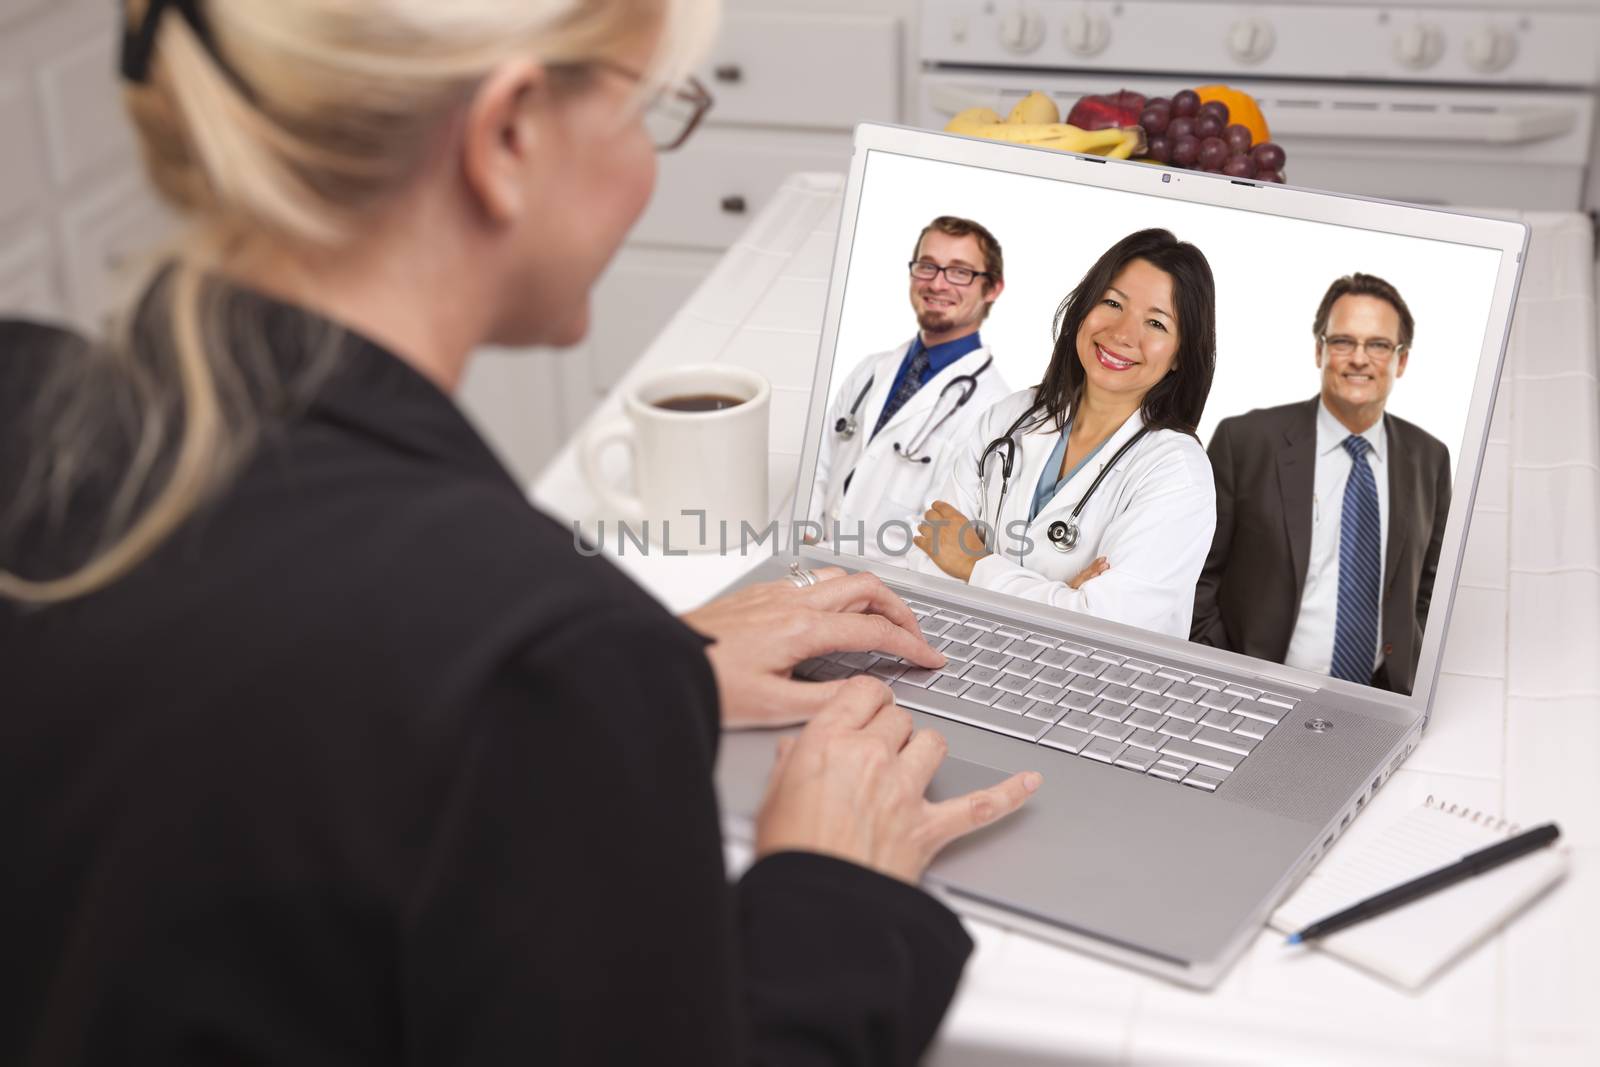 Over Shoulder of Woman In Kitchen Using Laptop Online Chat with Nurses or Doctors on Screen.